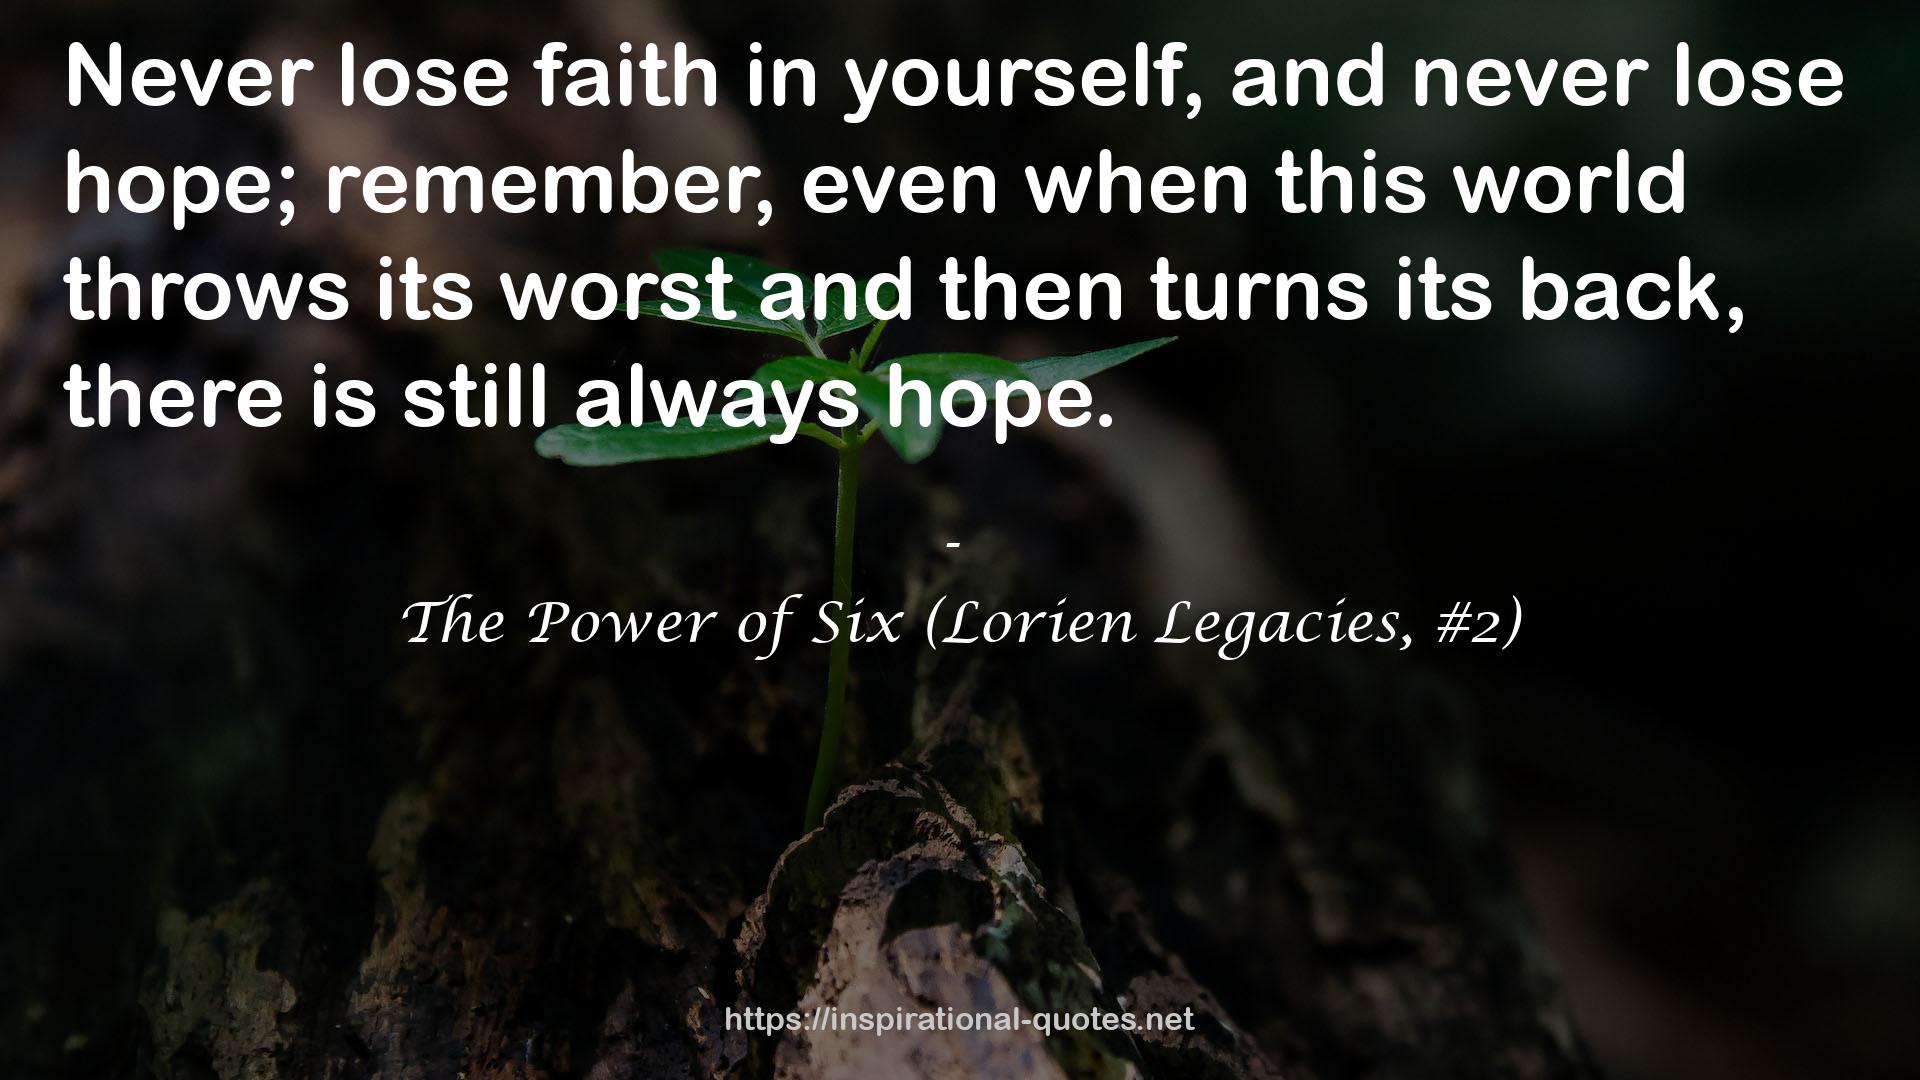 The Power of Six (Lorien Legacies, #2) QUOTES